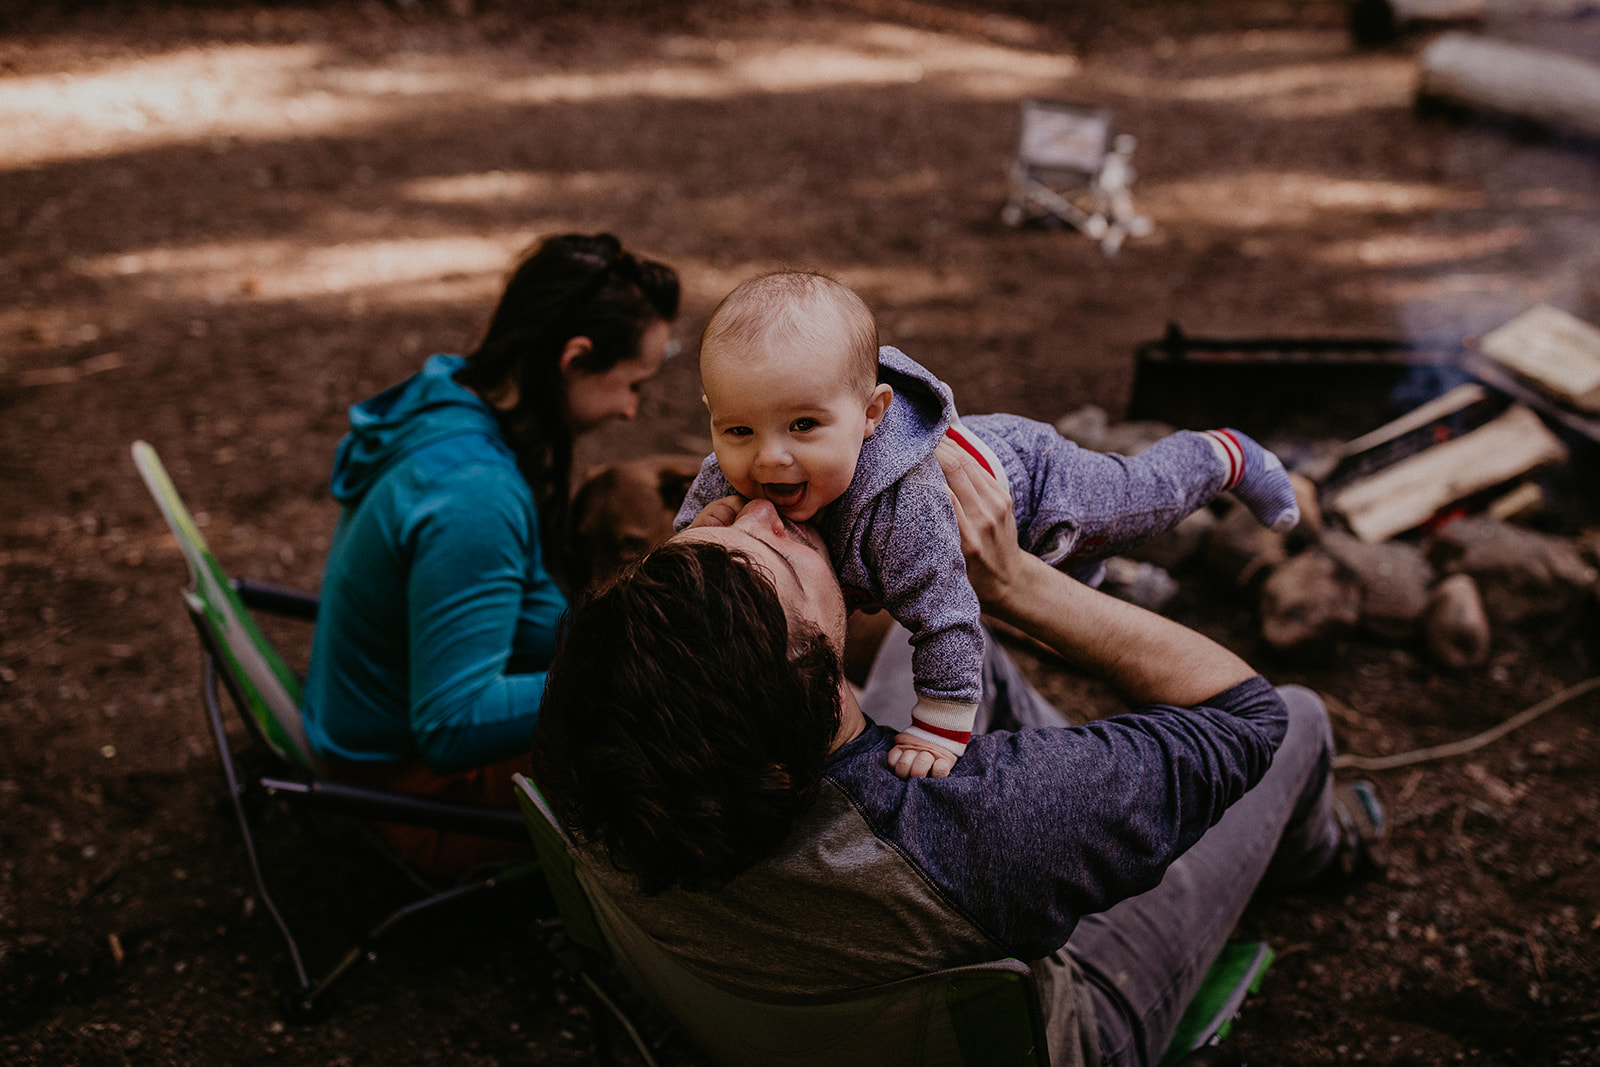 kachess-lake-camping-family-portraits-megan-gallagher-photography_(26_of_335).jpg